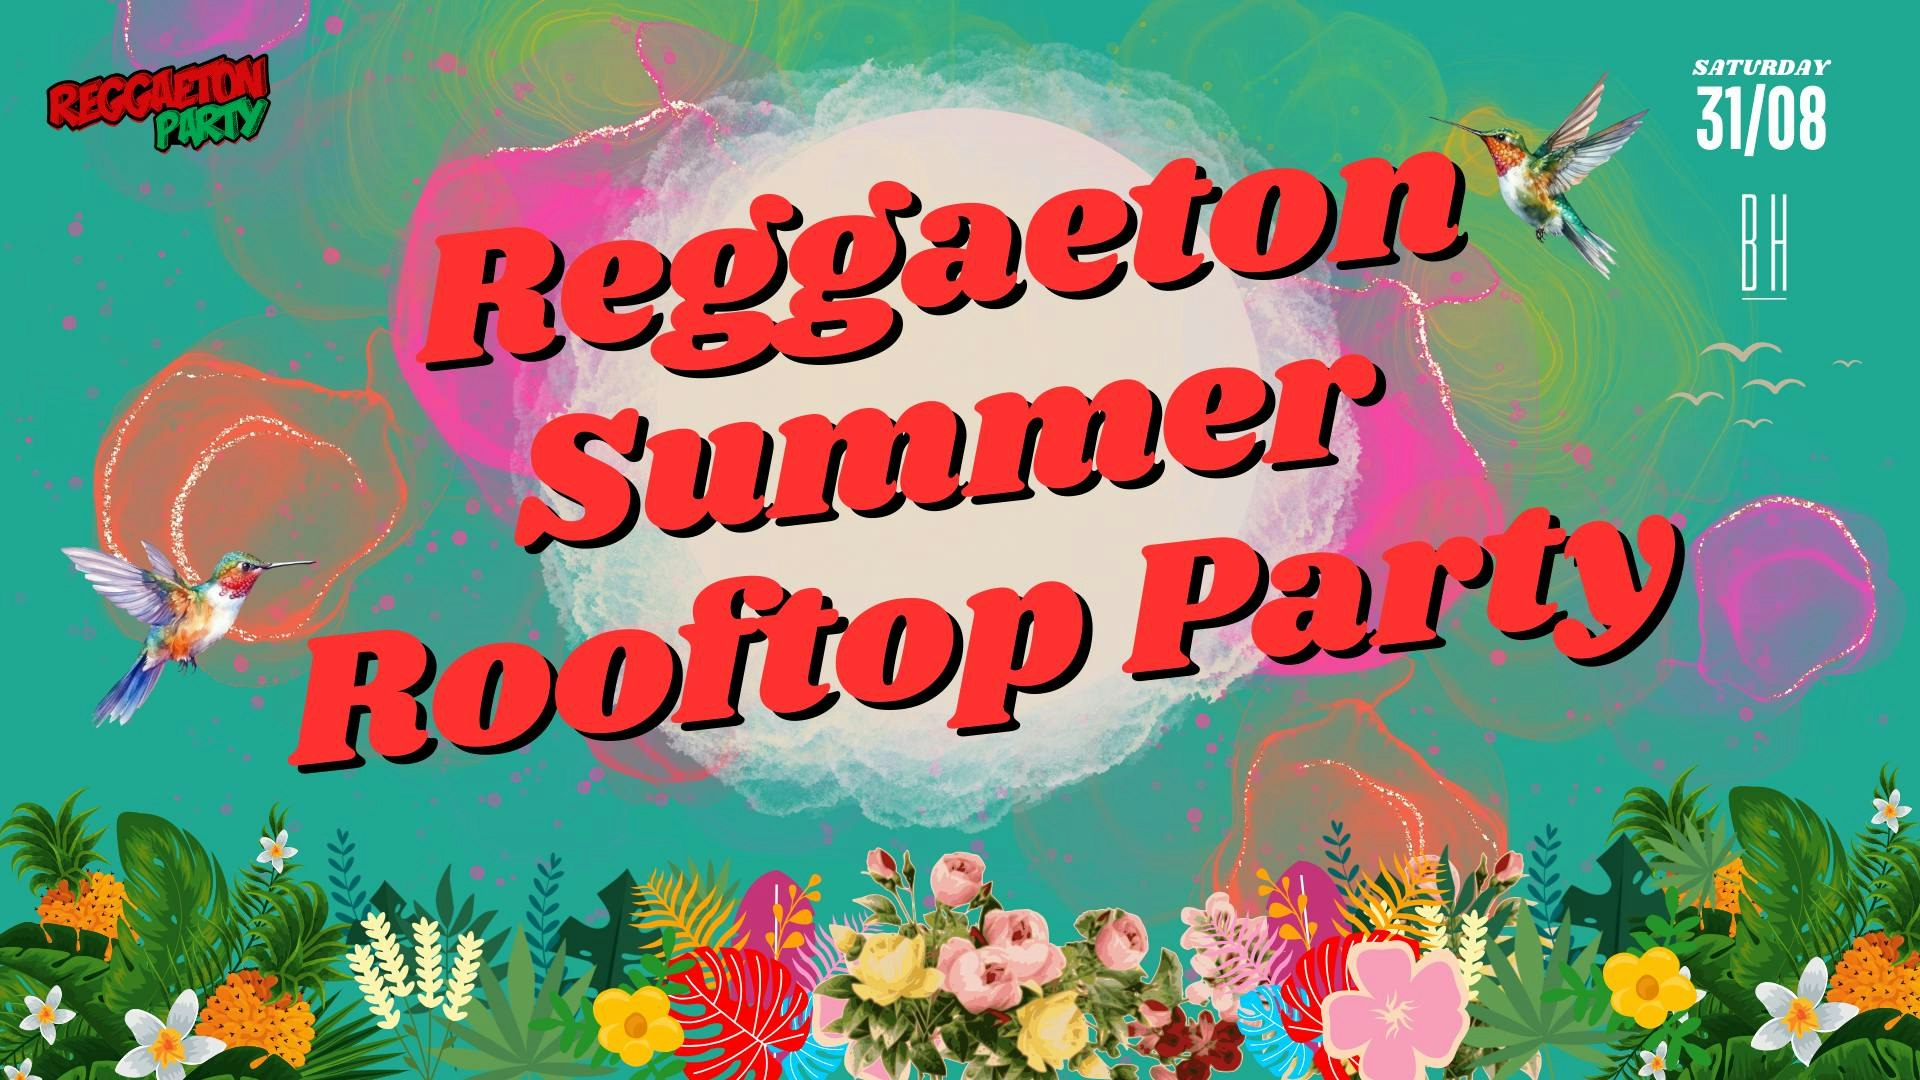 Reggaeton Rooftop Party (Manchester) August